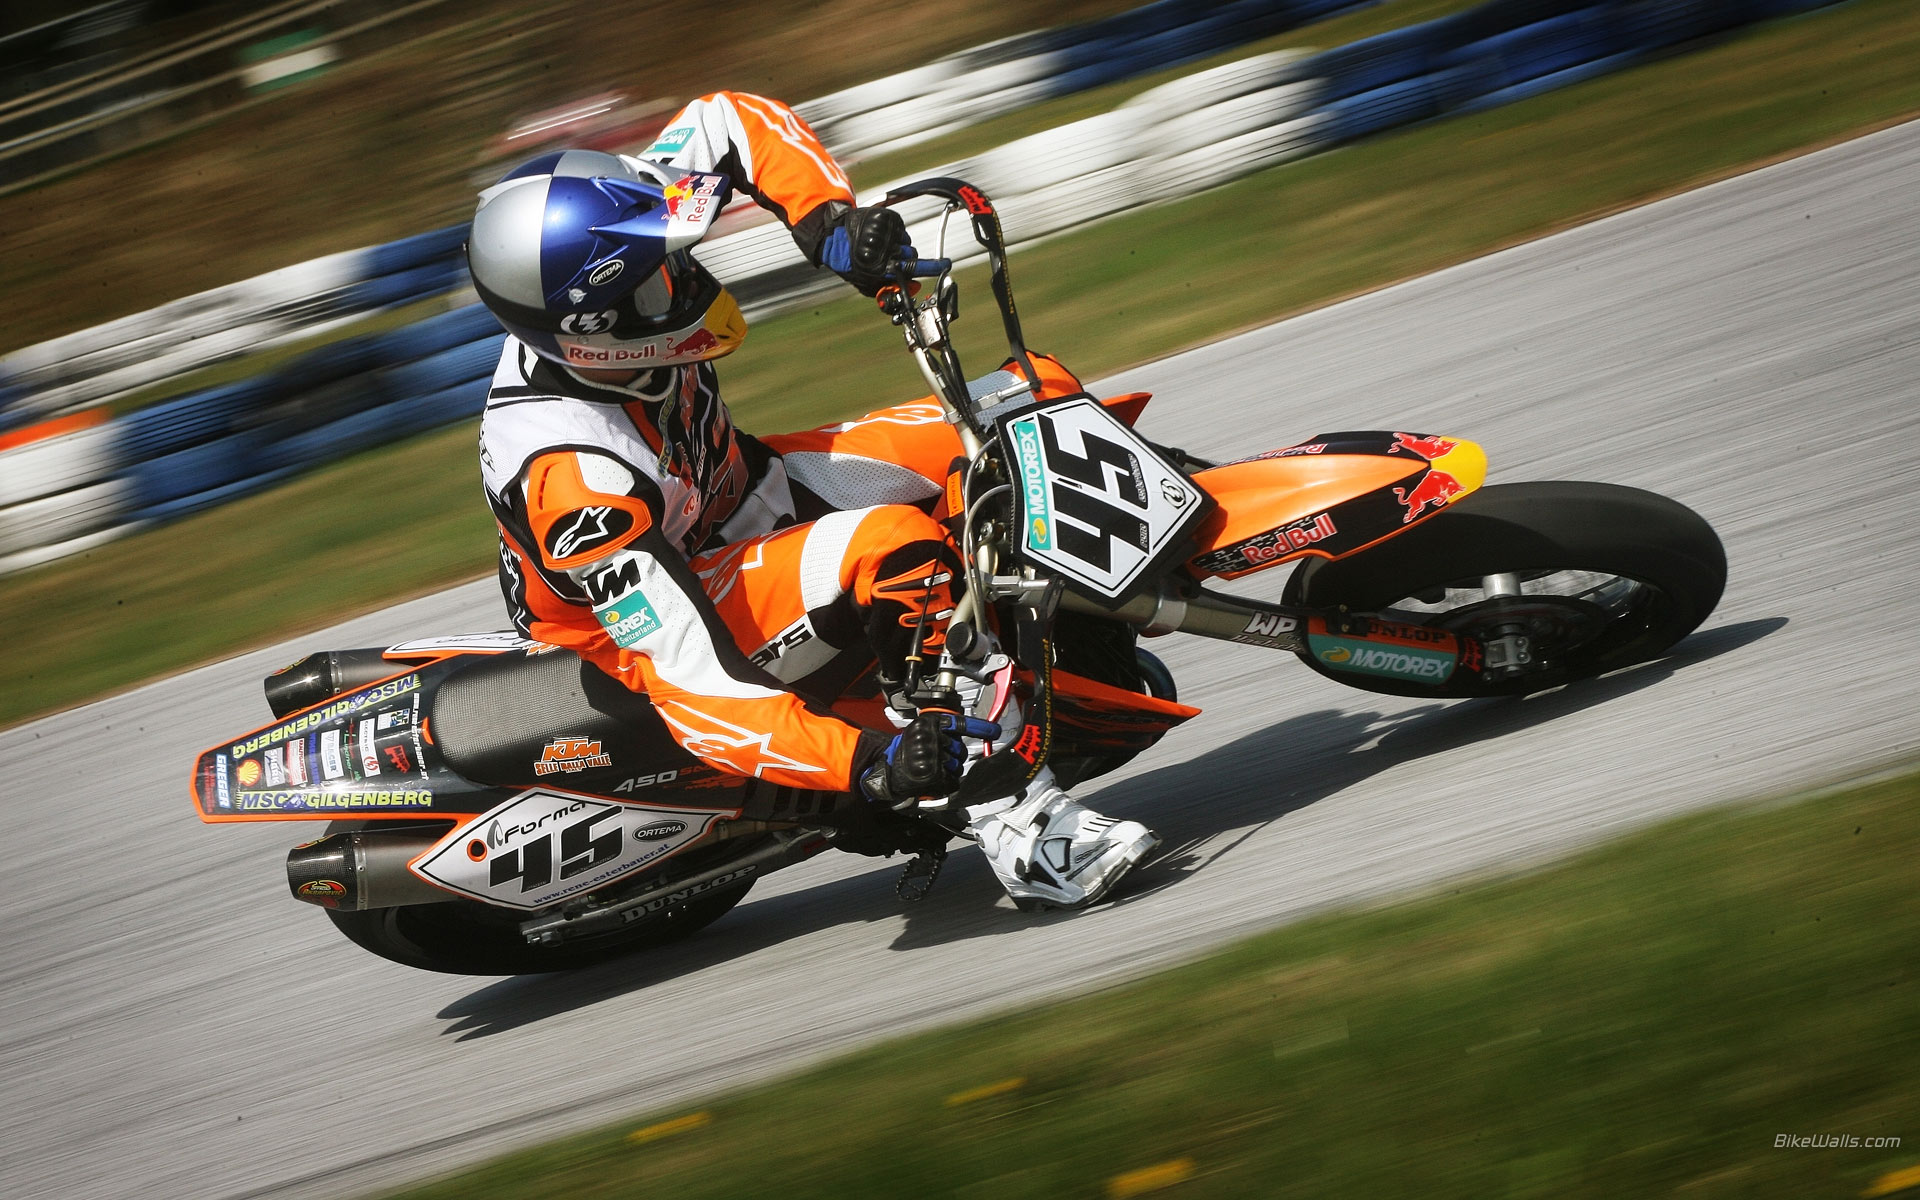 Supermoto 4K wallpapers for your desktop or mobile screen free and